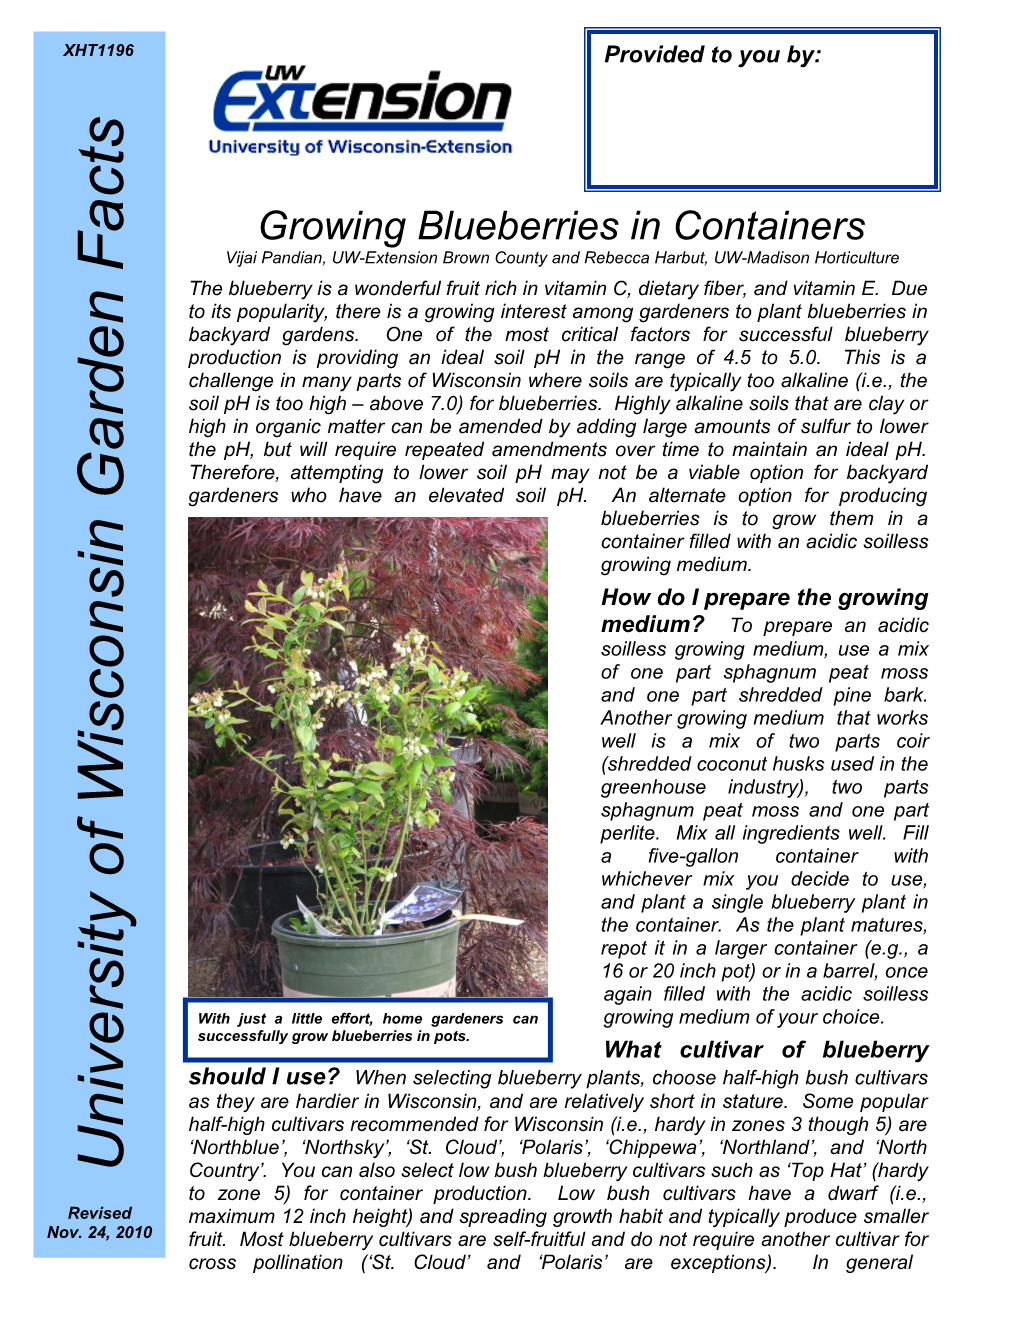 Growing Blueberries in Containers